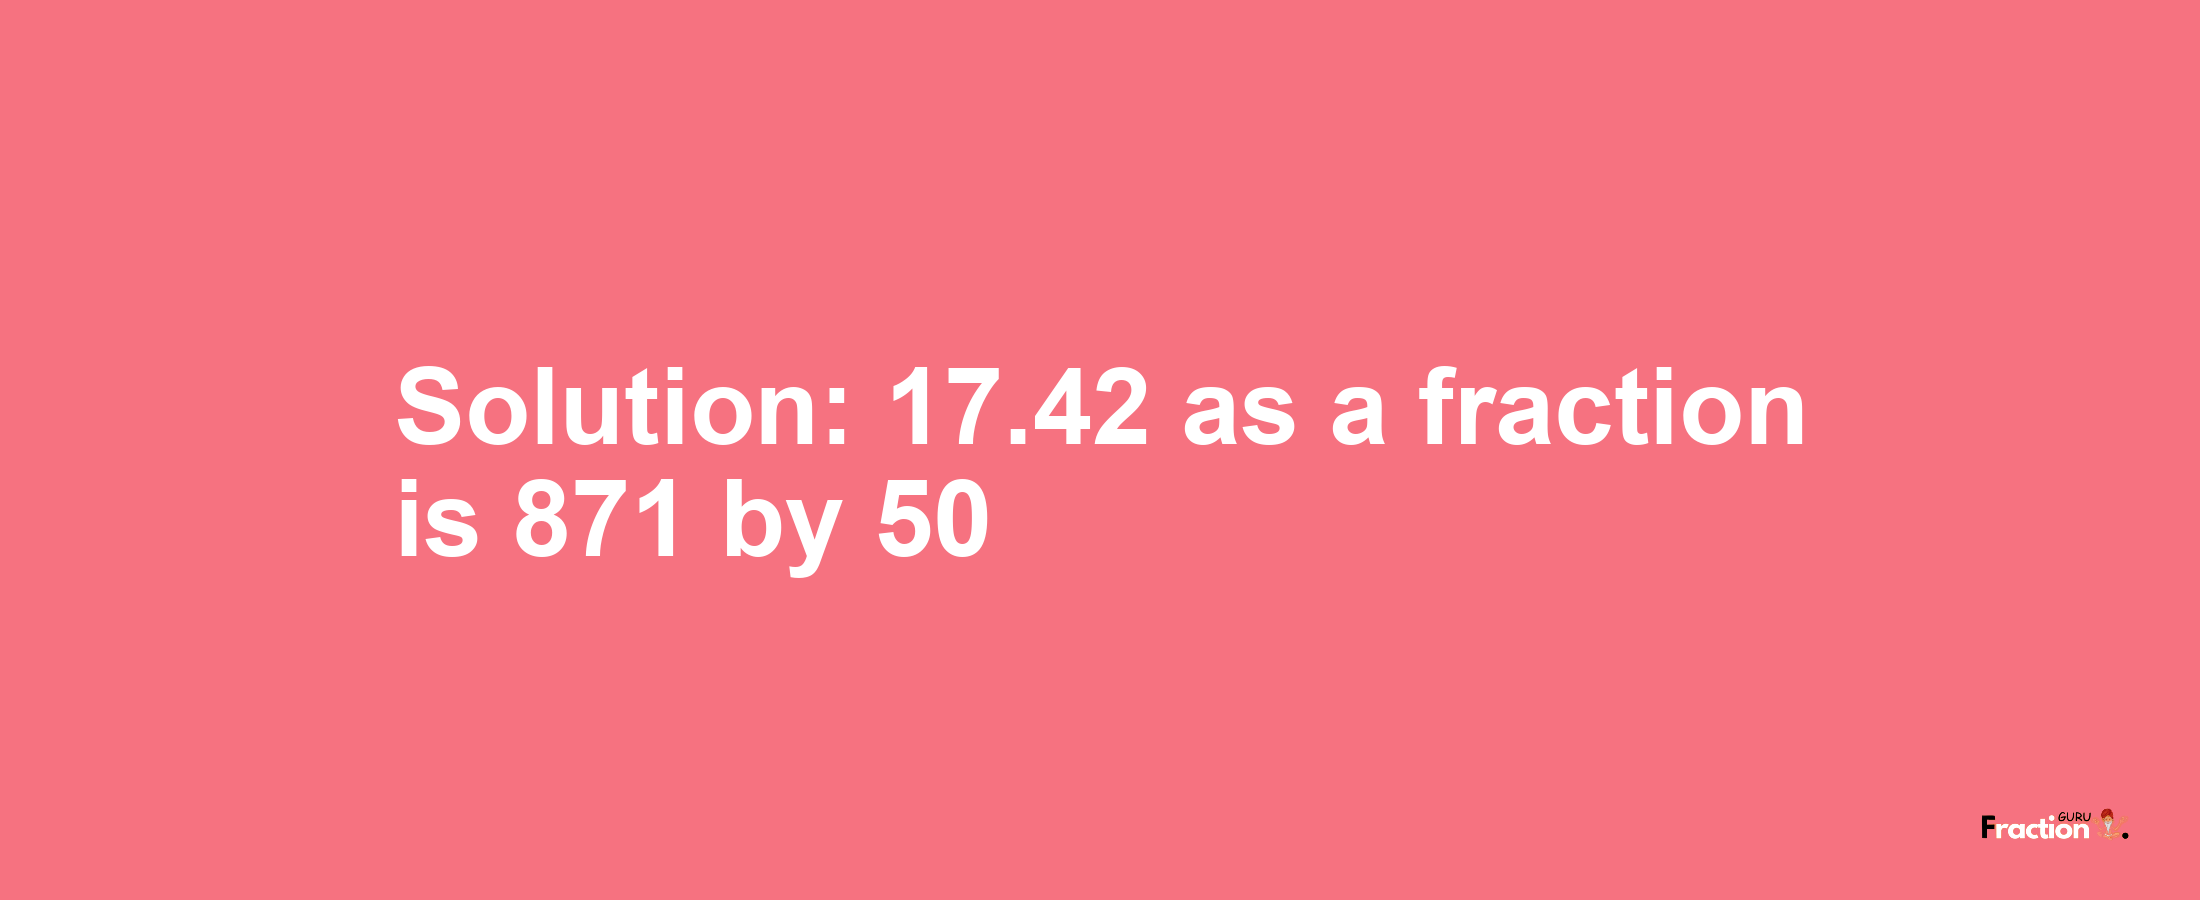 Solution:17.42 as a fraction is 871/50